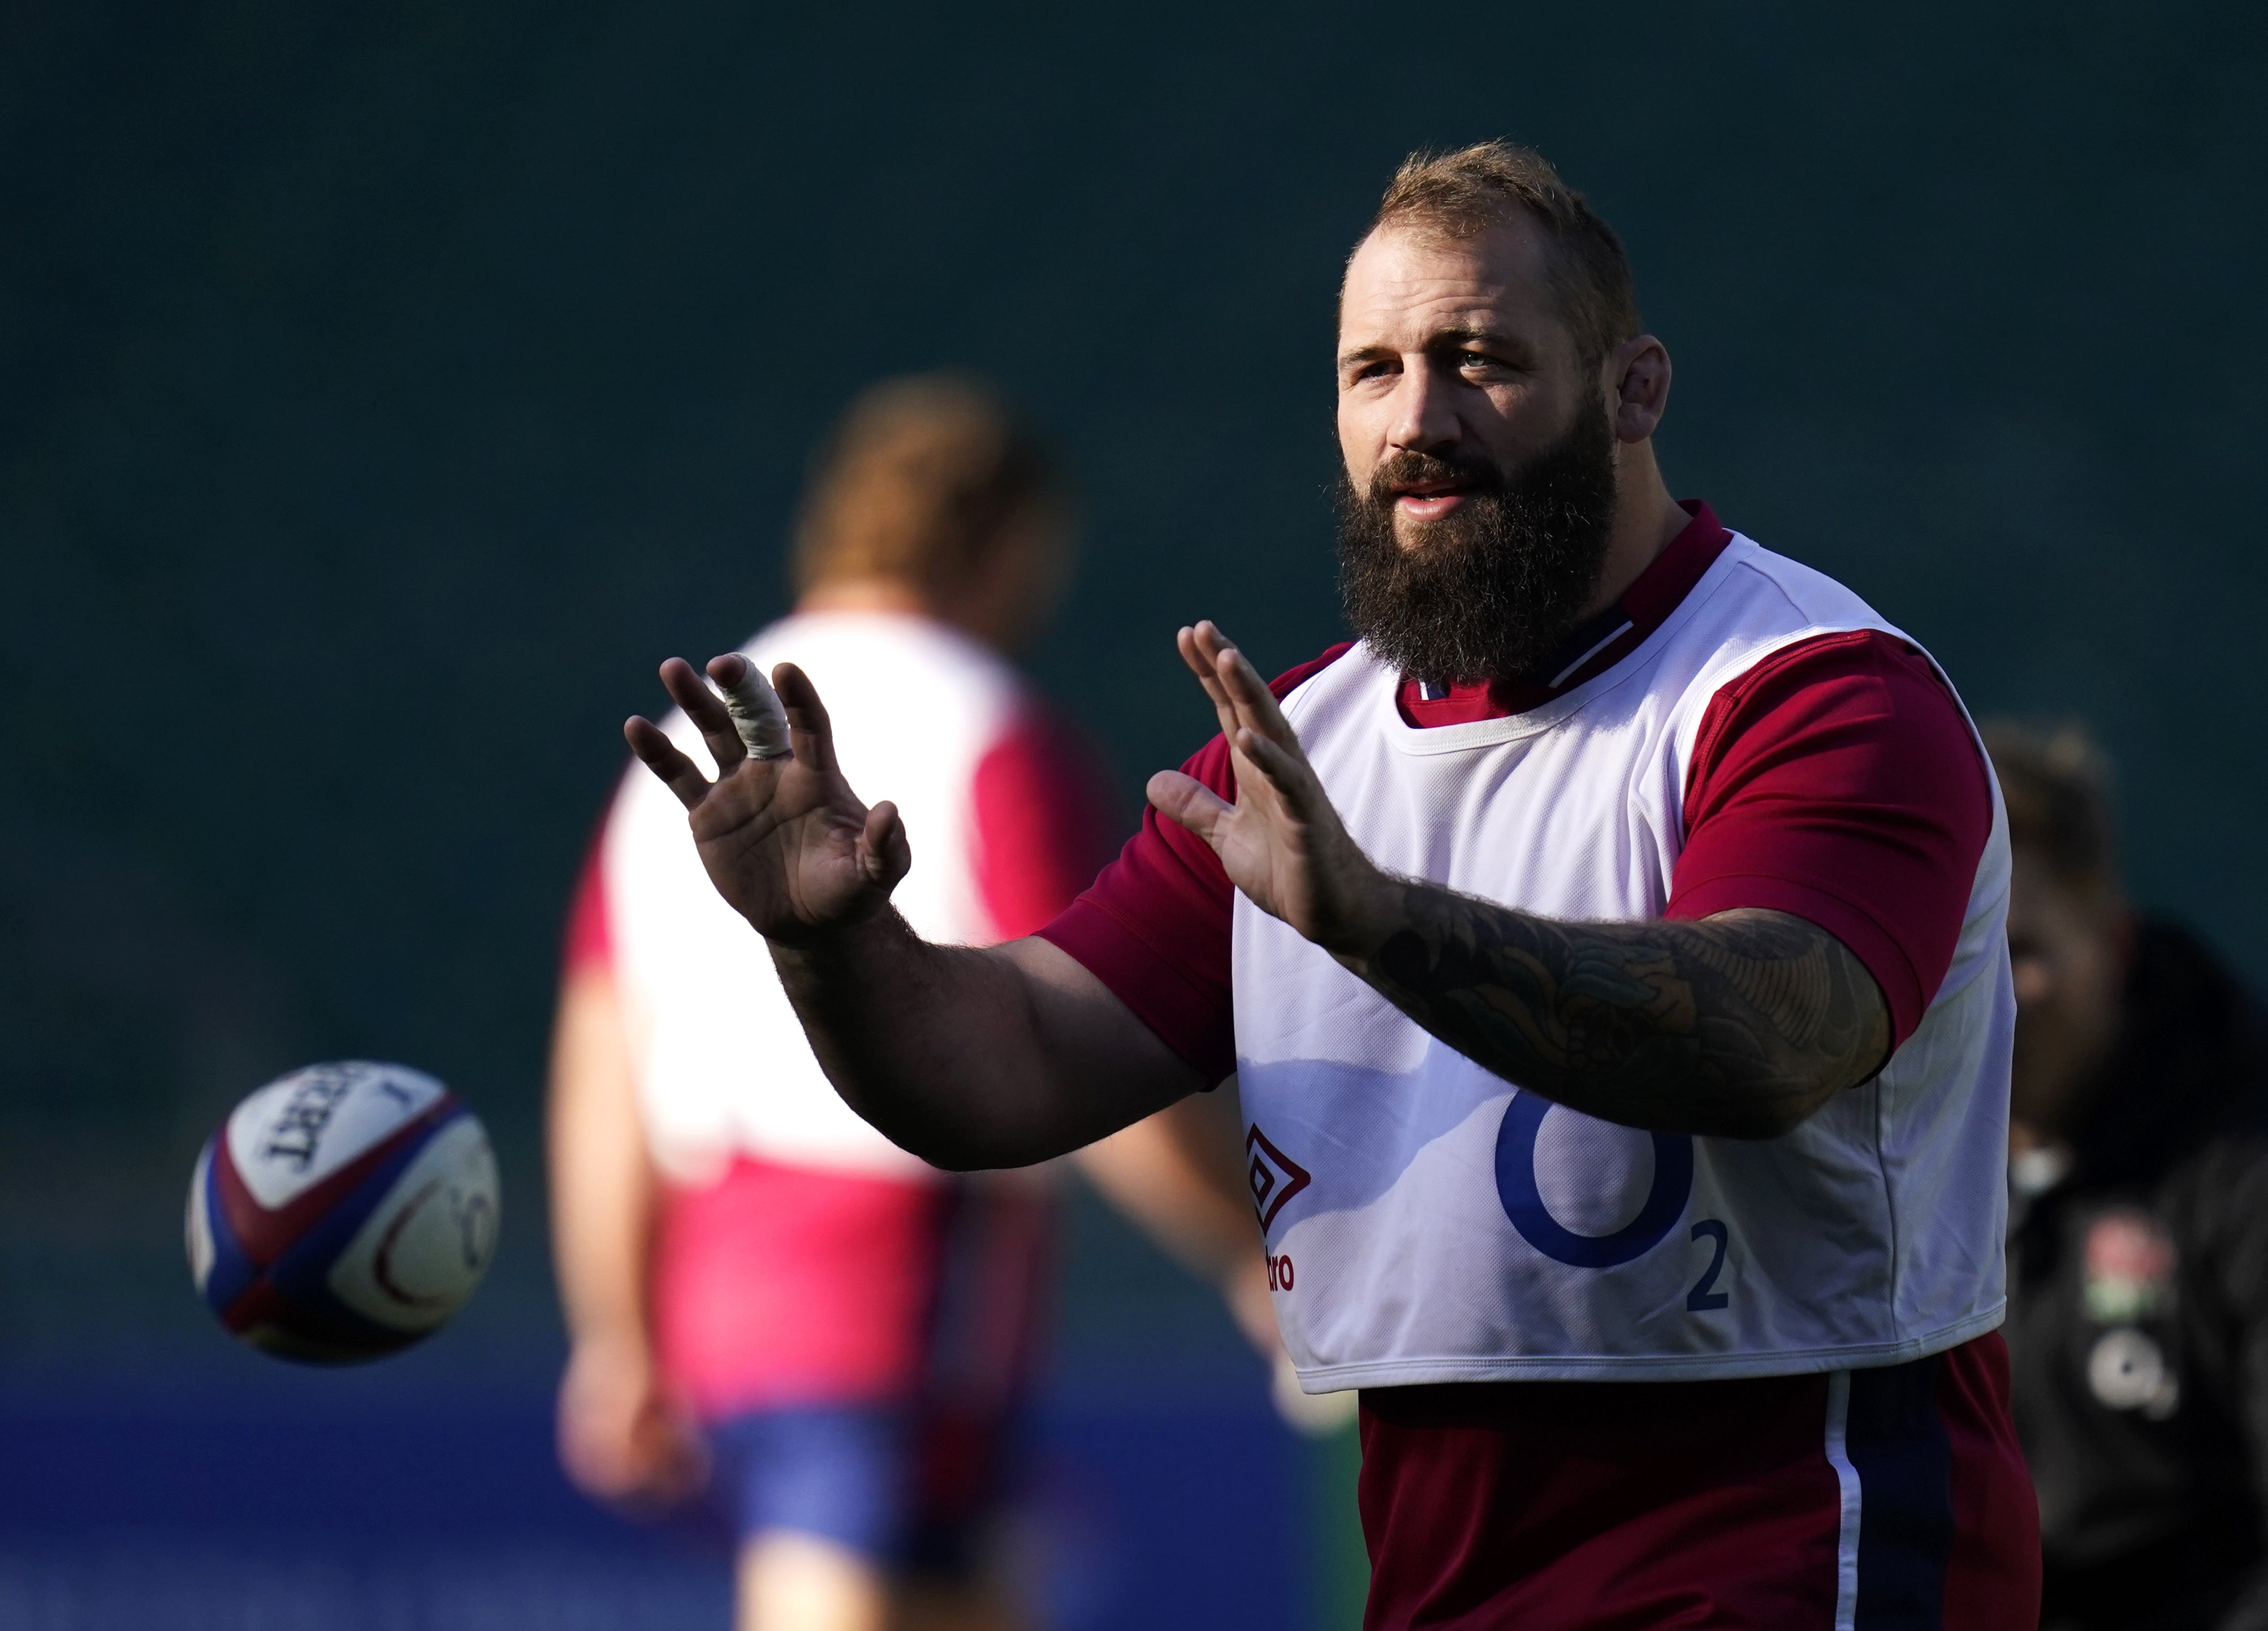 Joe Marler is expected to play a role against South Africa despite only leaving self-isolation the day before (Andrew Matthews/PA)